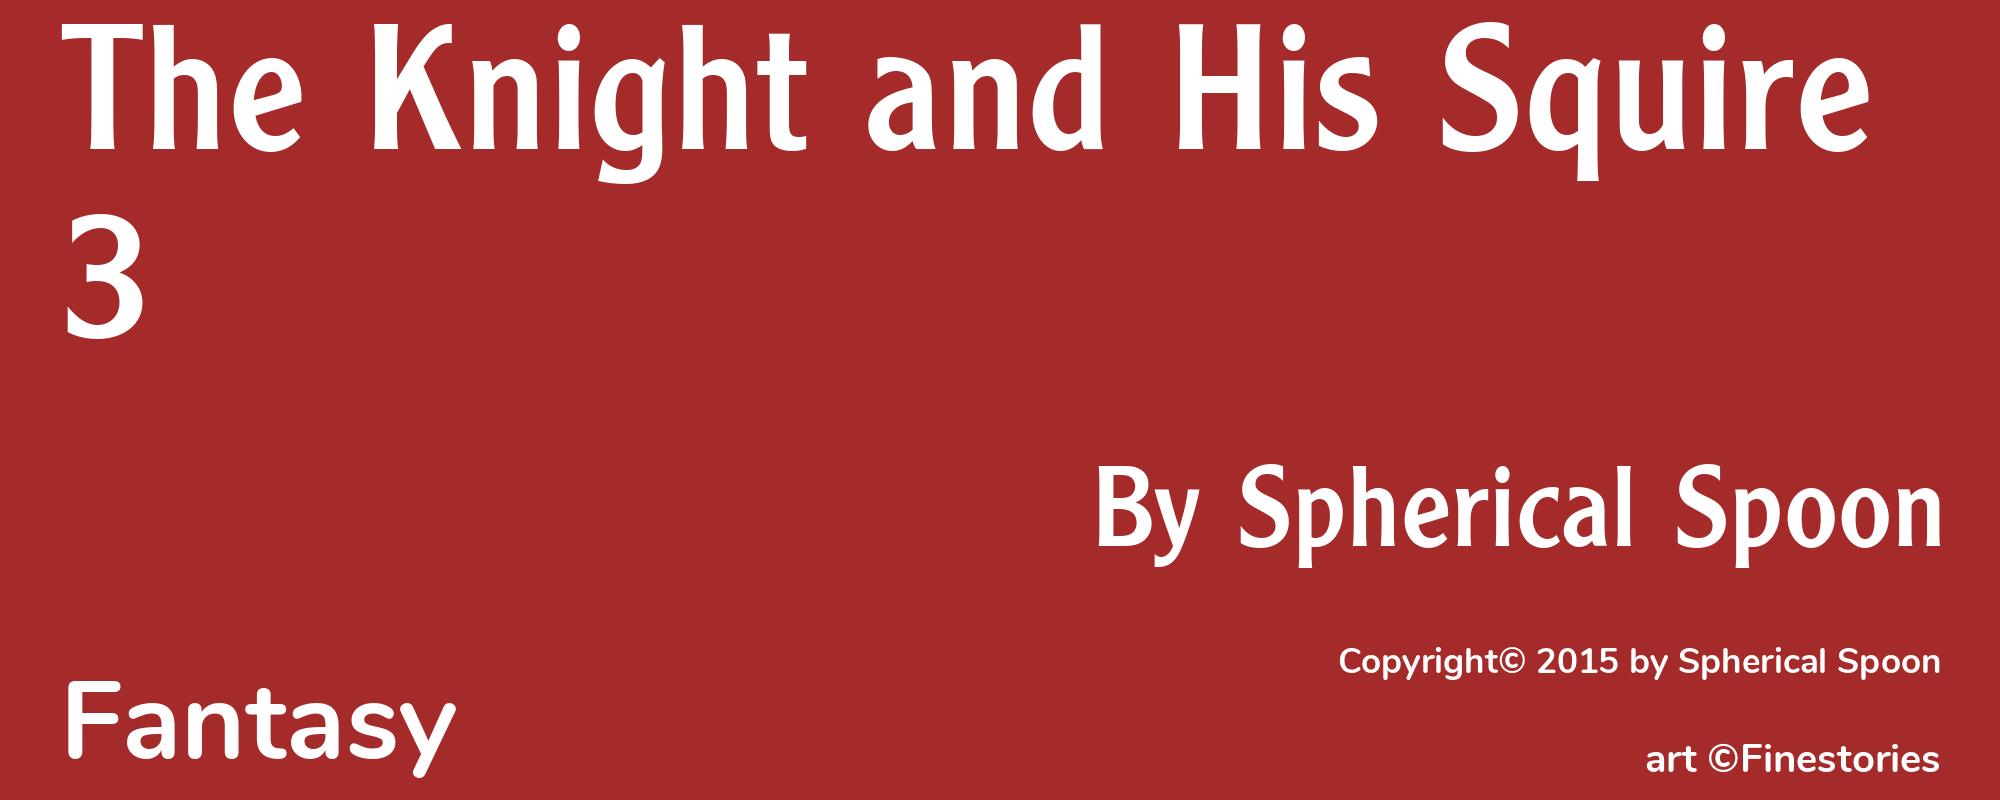 The Knight and His Squire 3 - Cover